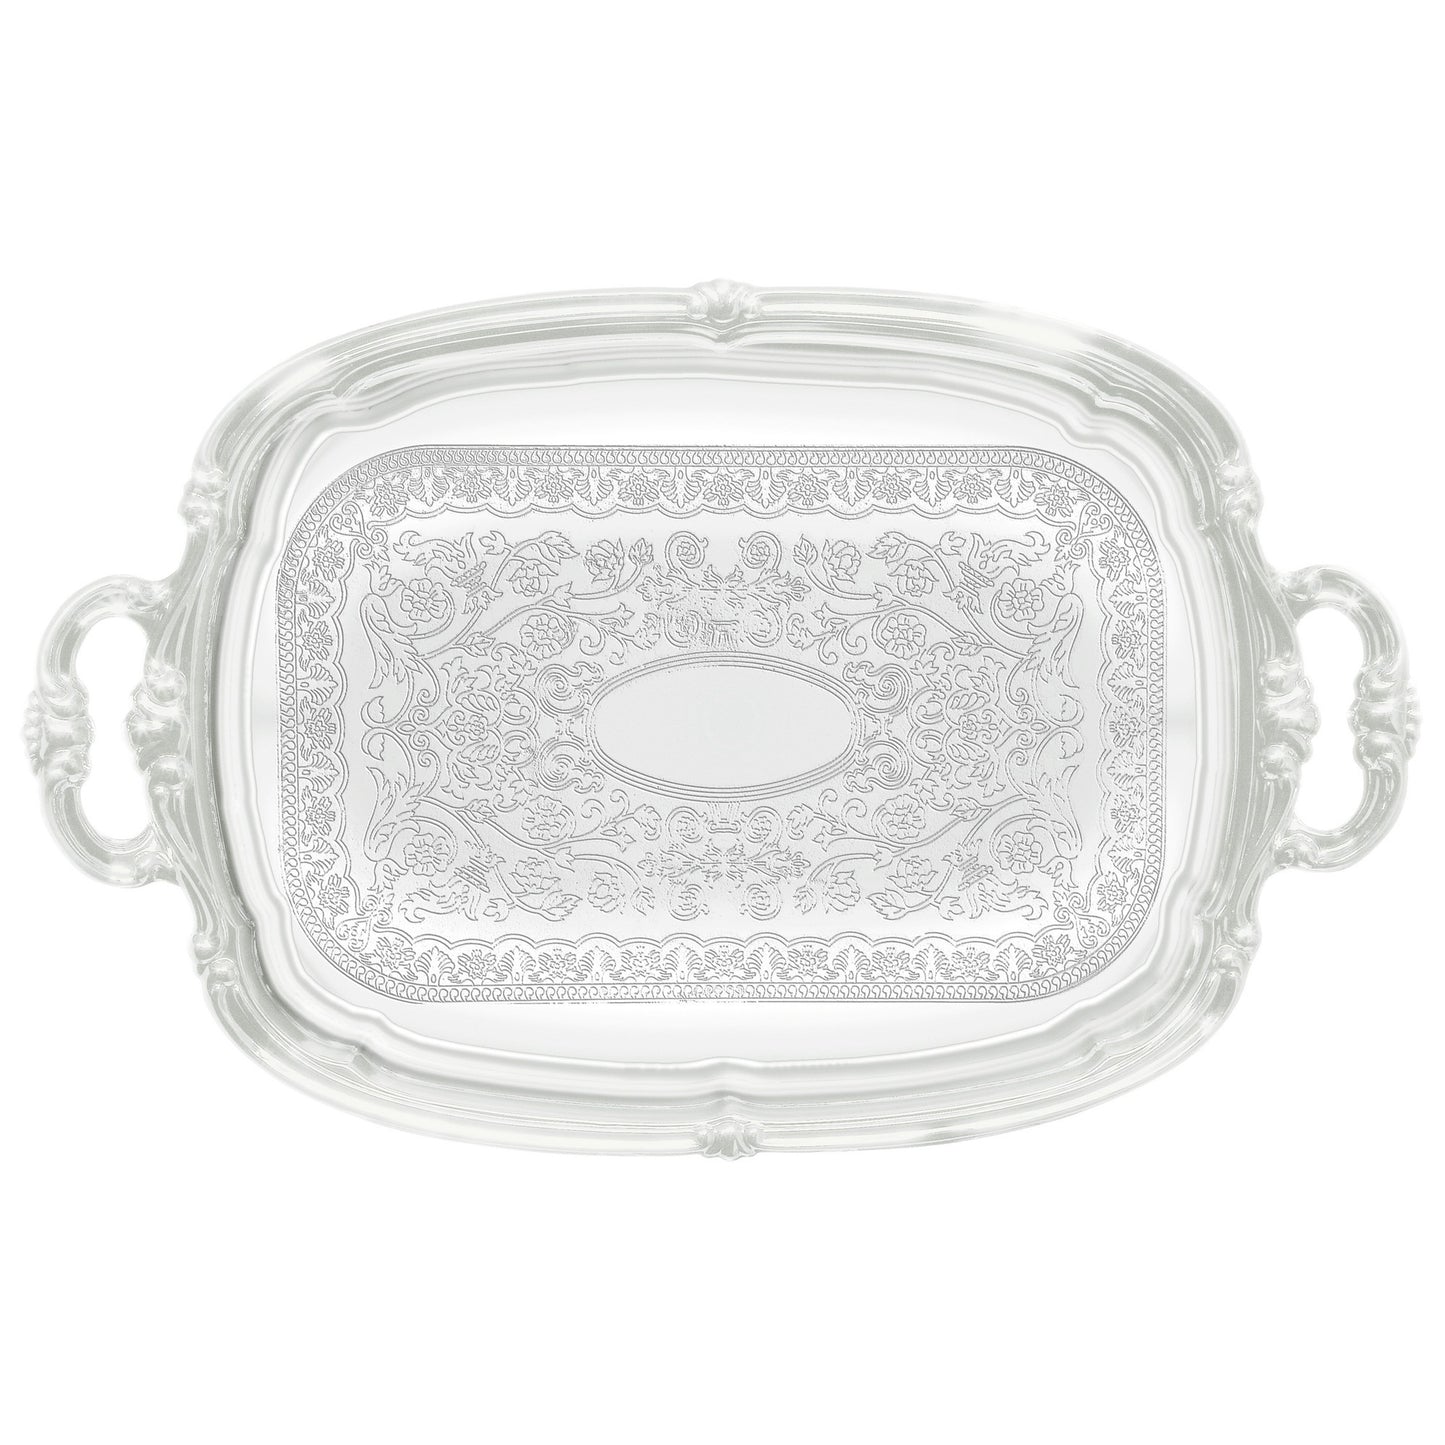 Chrome-Plated Serving Tray - Rectangular, 19-1/2 x 12-1/2